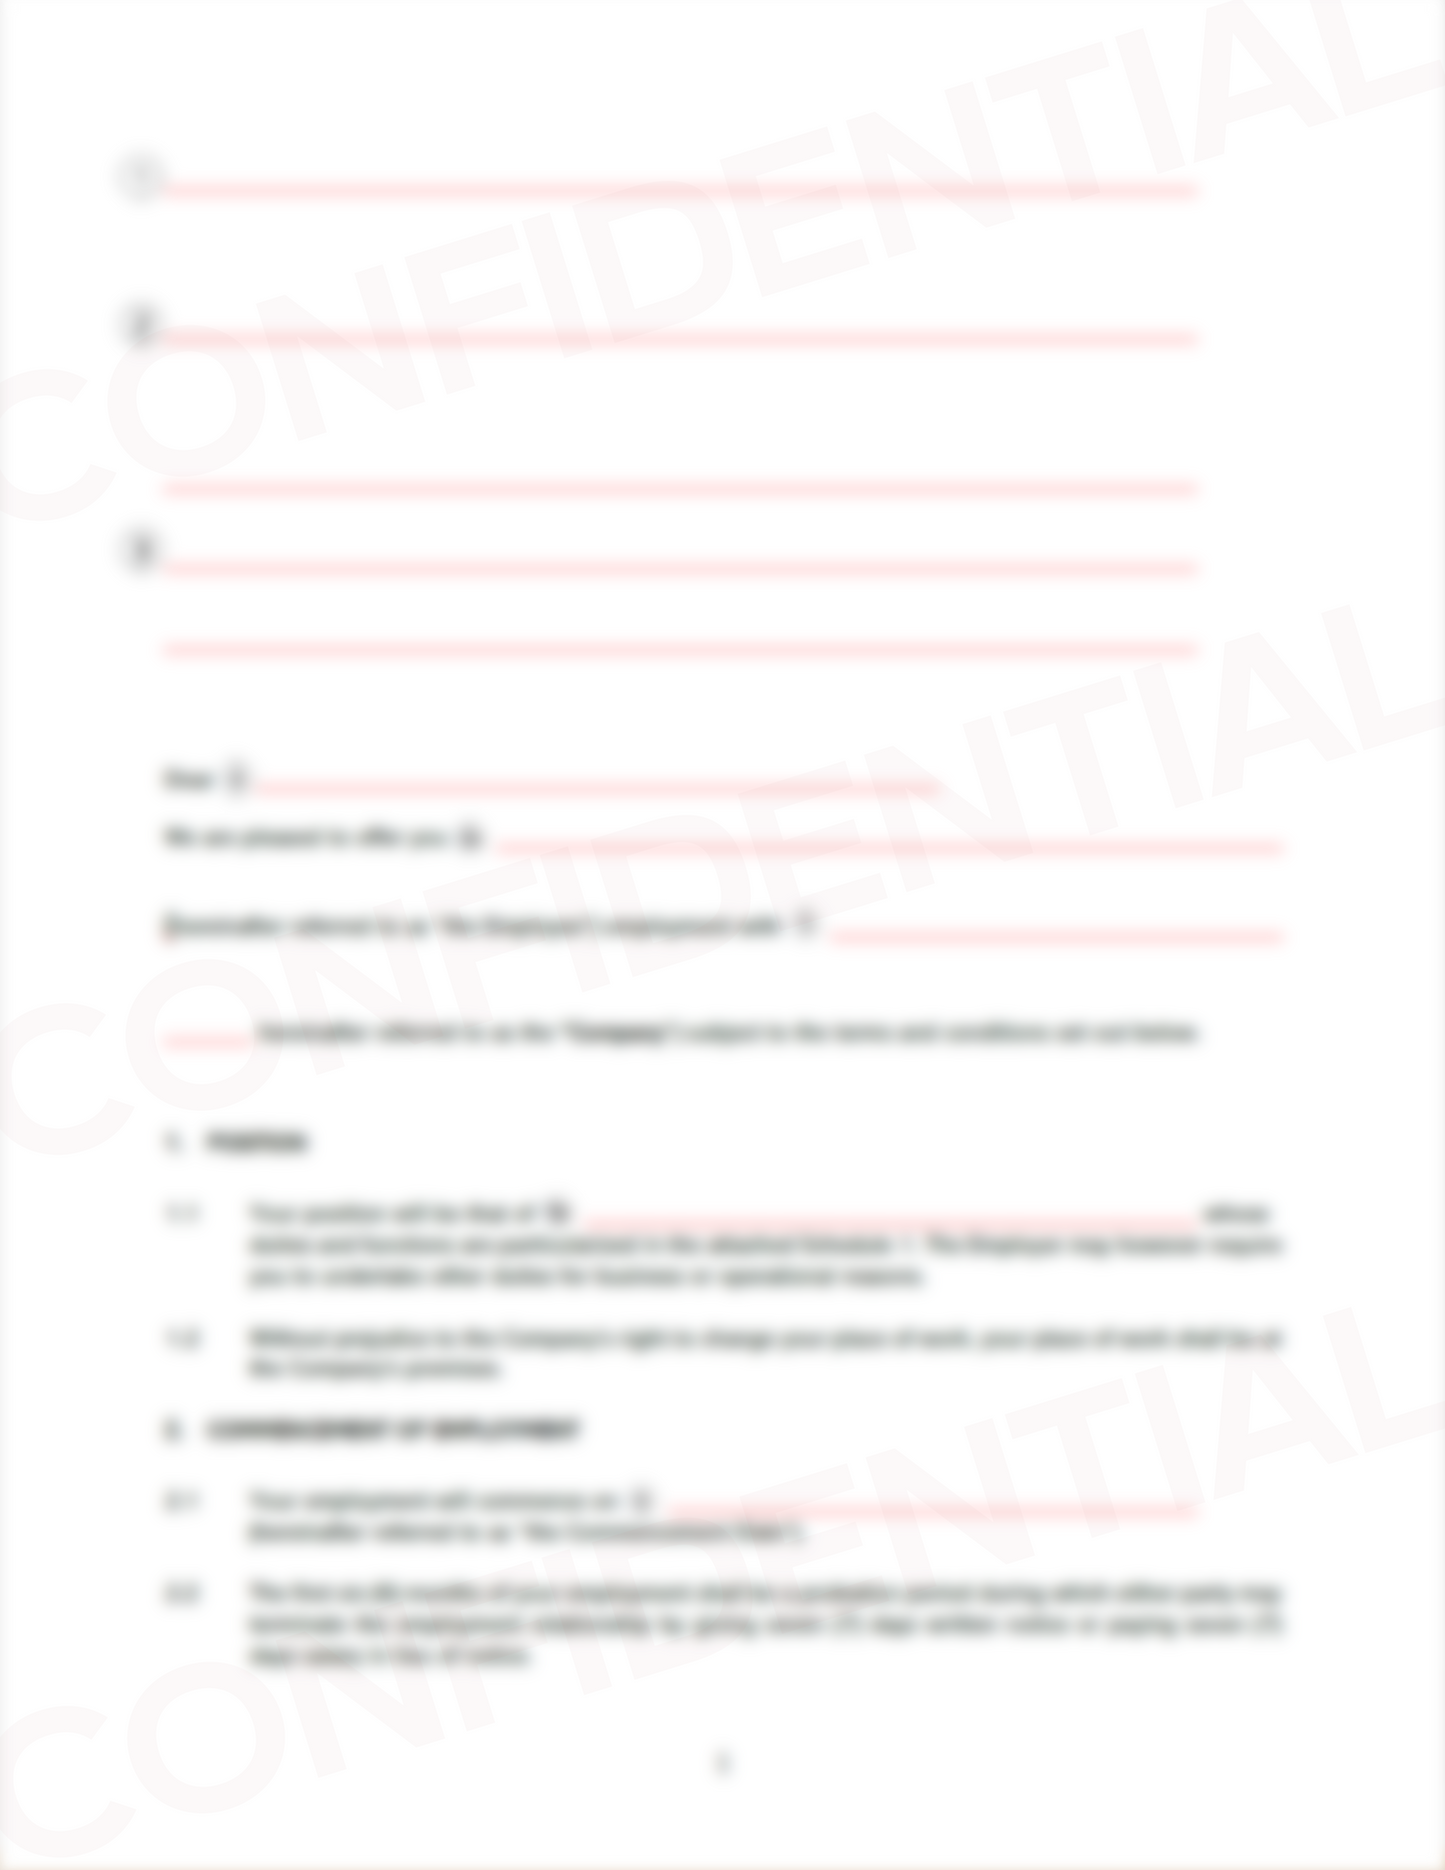 Permanent Employment Agreement template - Legal document for employer and employee rights